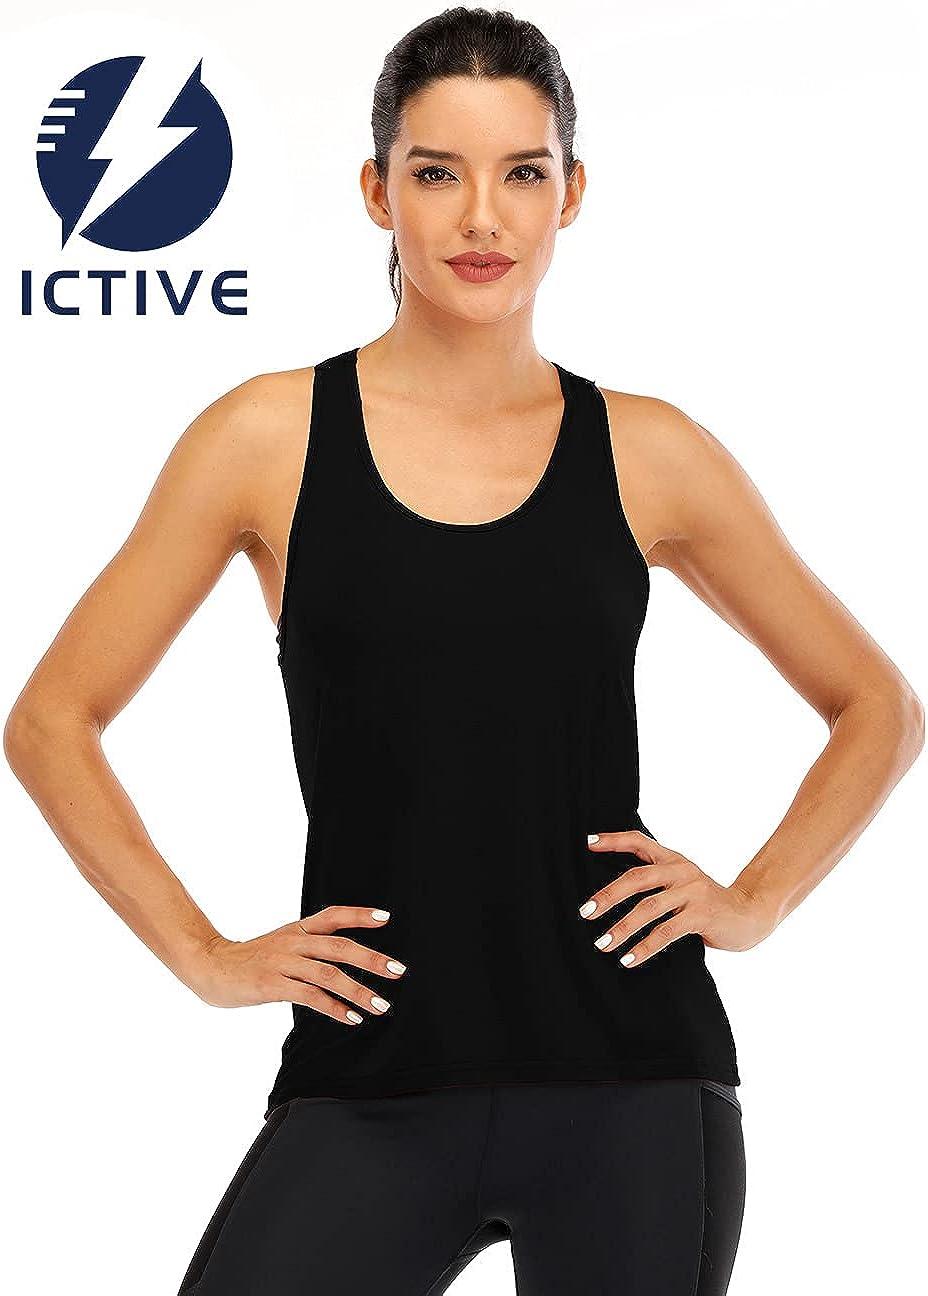  ICTIVE Workout Tops For Women Loose Fit Racerback